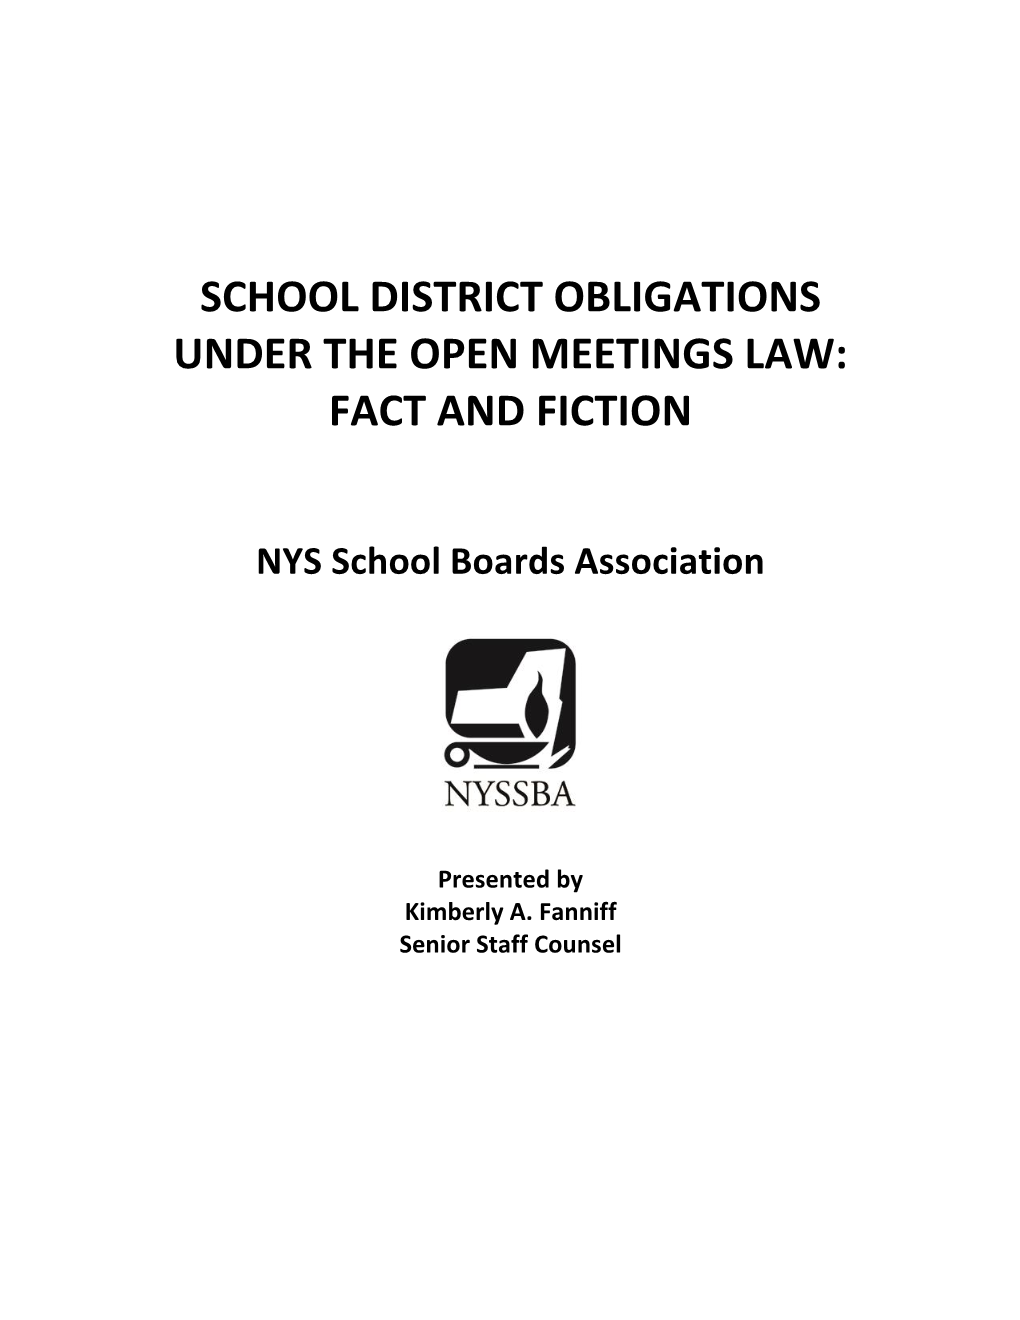 School District Obligations Under the Open Meetings Law: Fact and Fiction